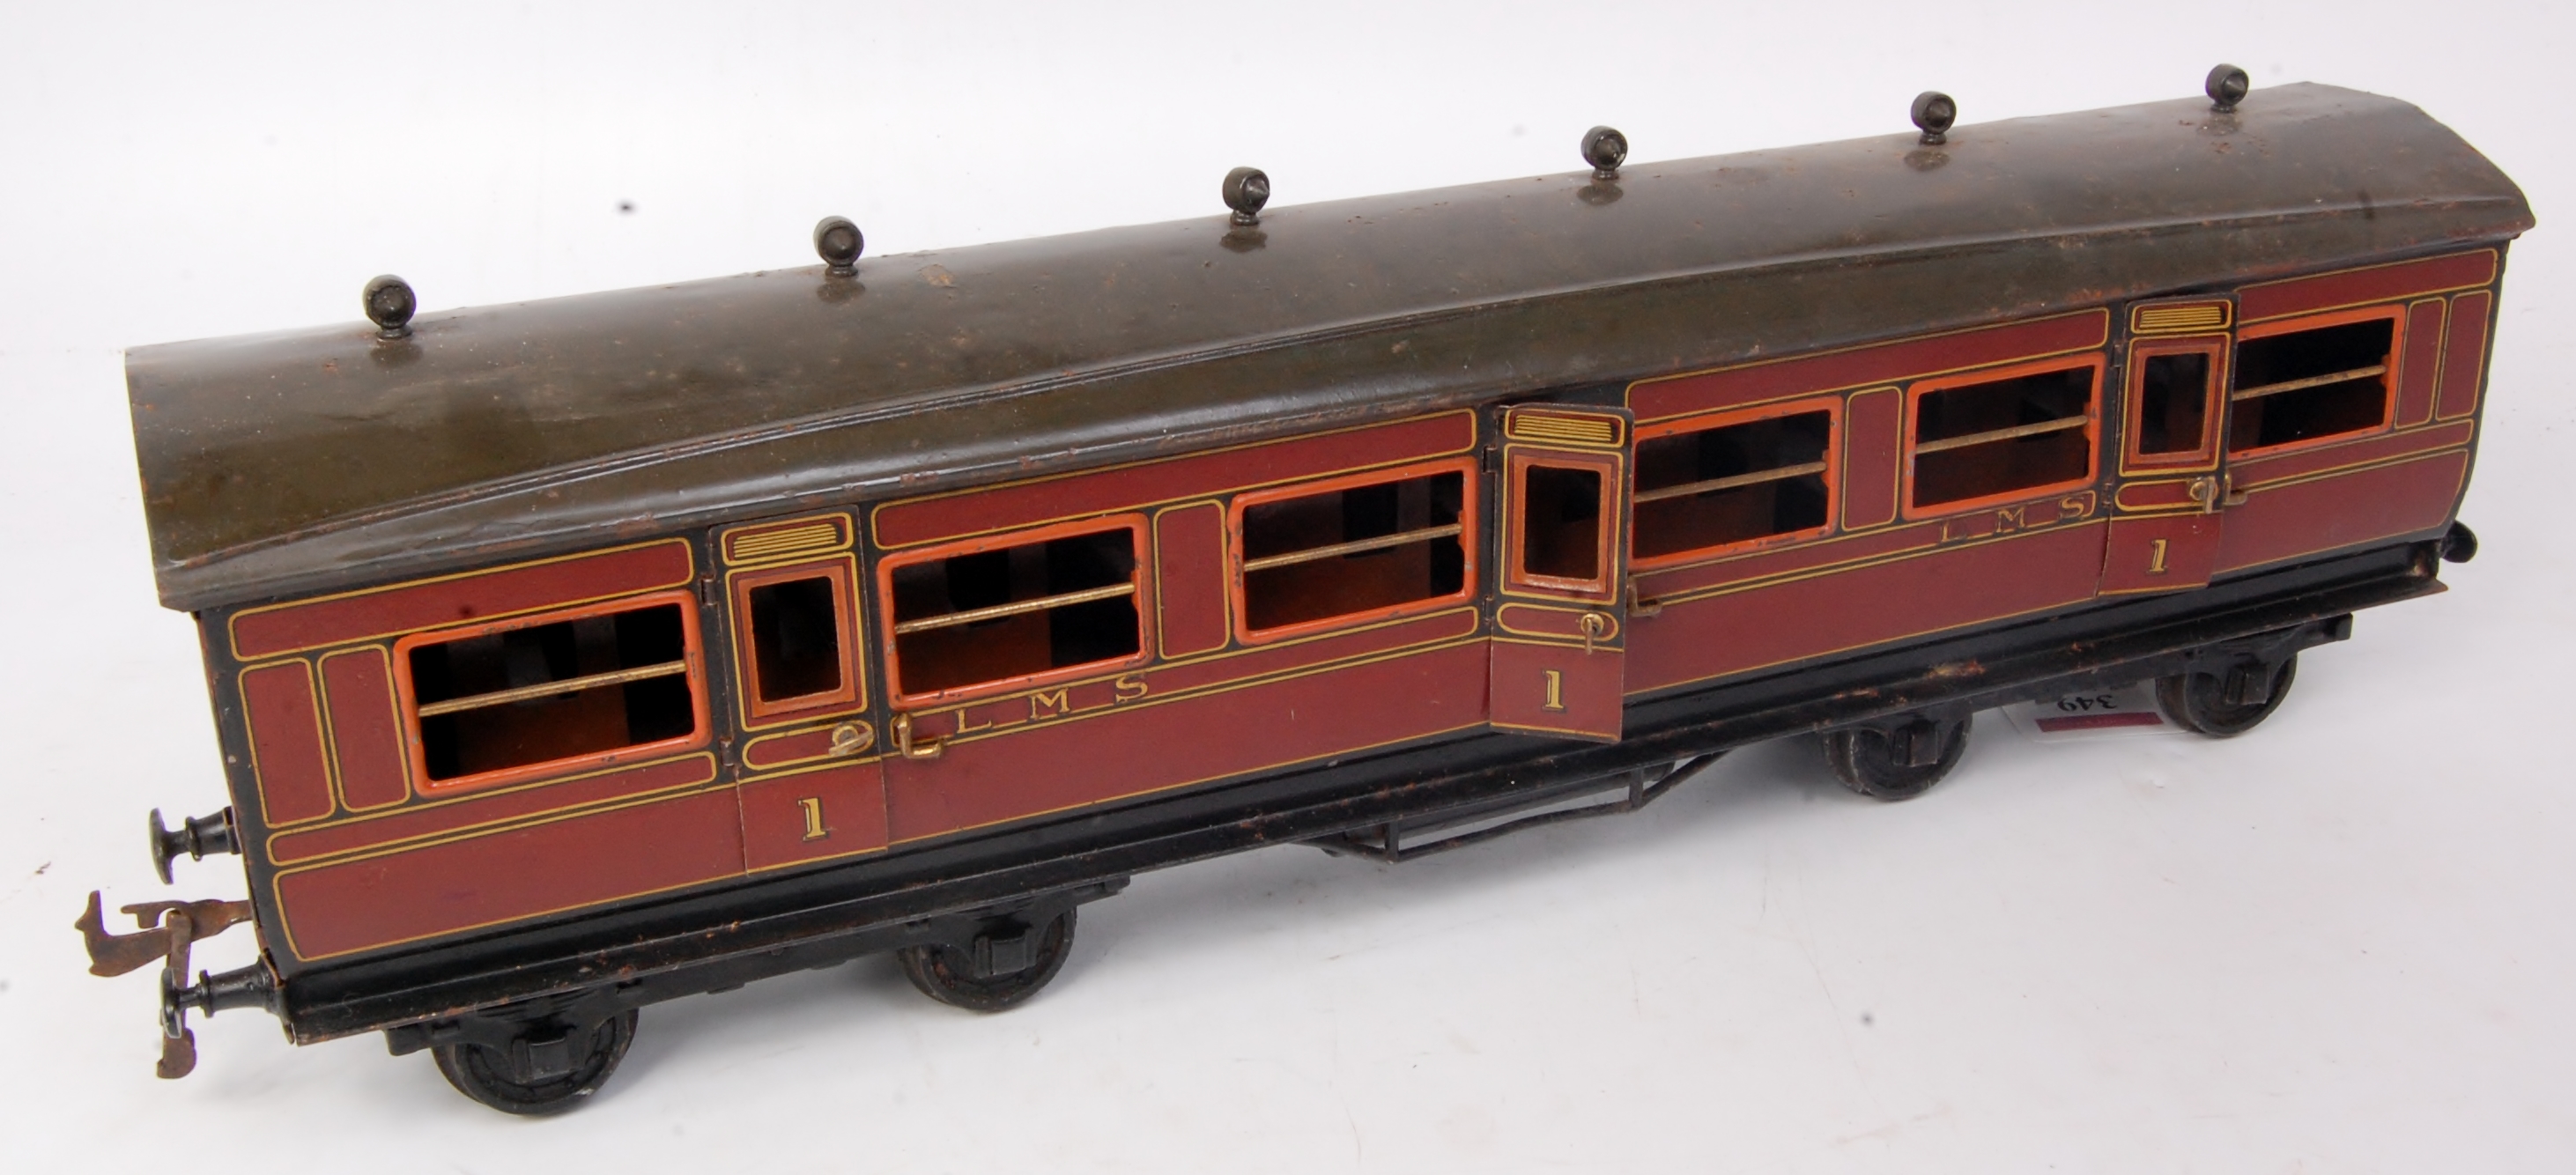 Bing GI maroon LMS 1st class corridor coach, some crazing to varnish on sides, roof pitted,